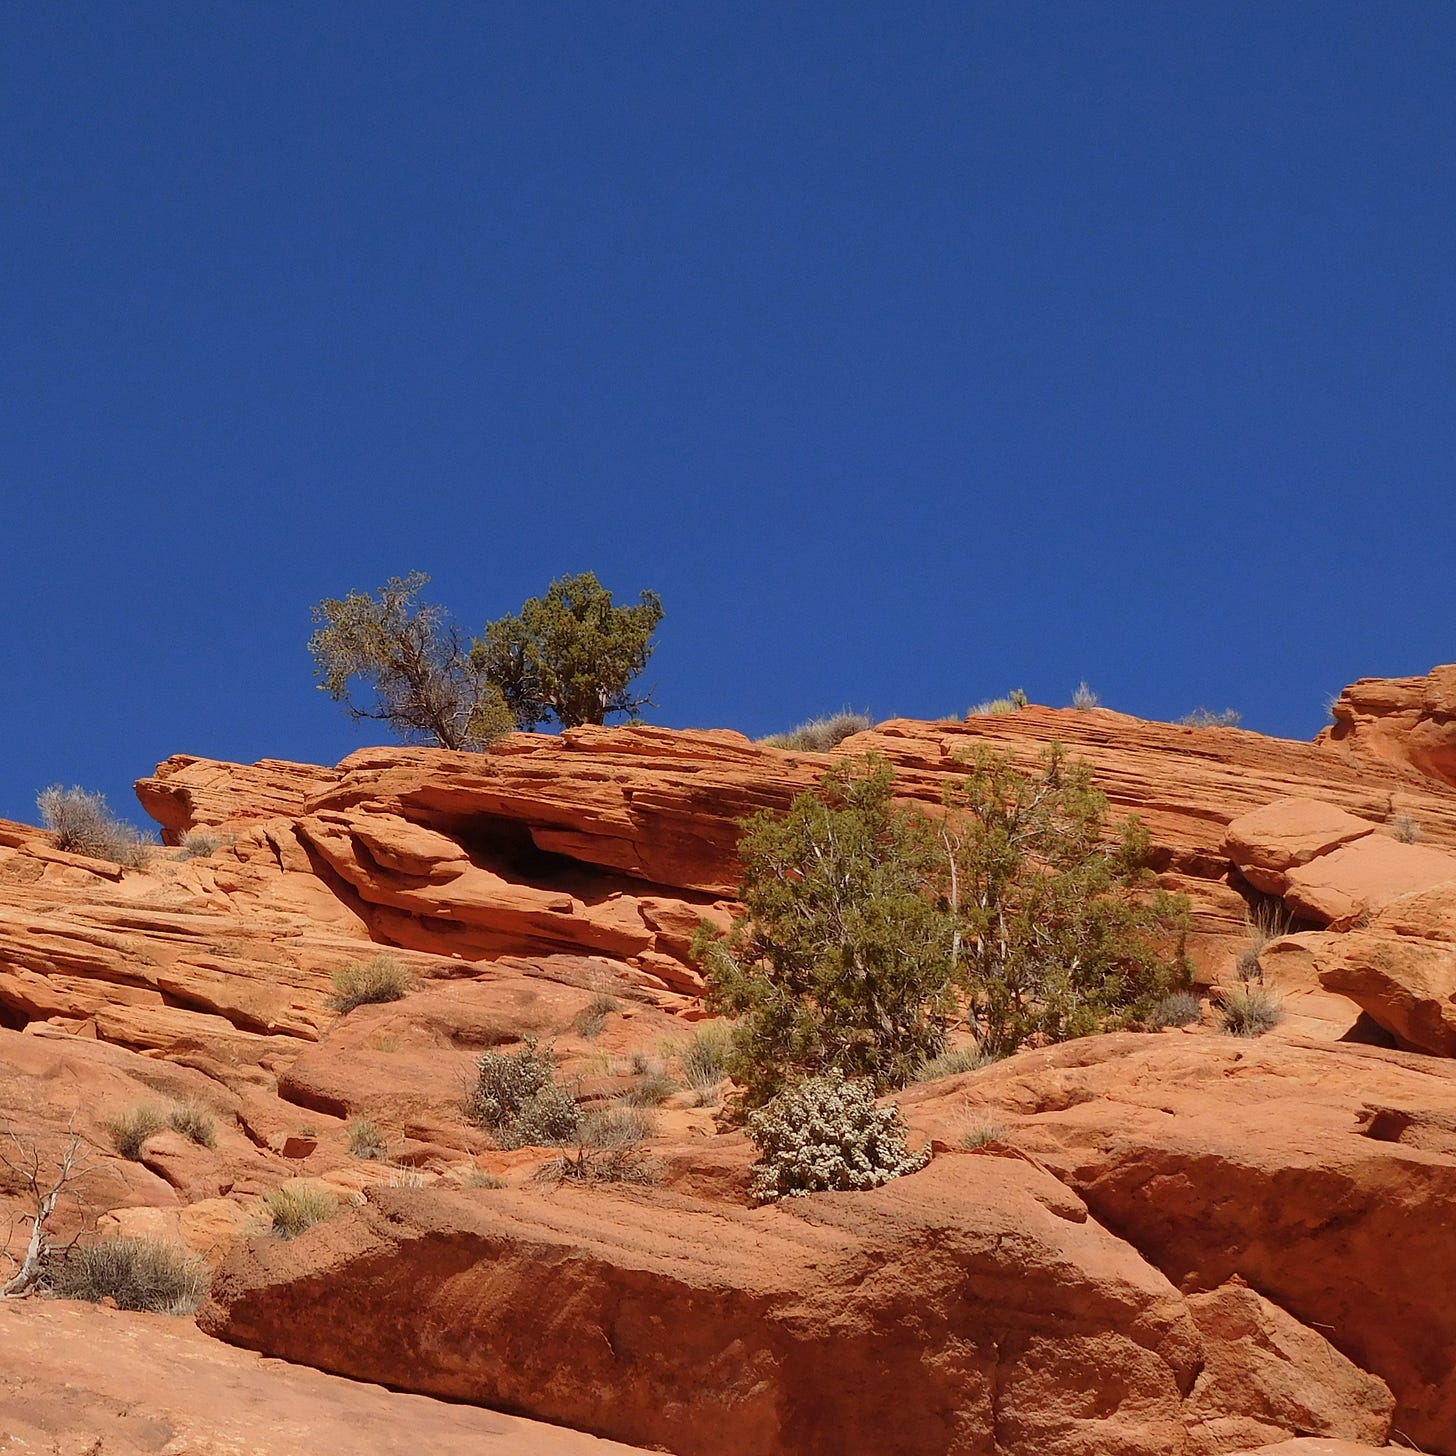 Hillside of red sandstone, with a few small shrubs, under a deep blue sky.